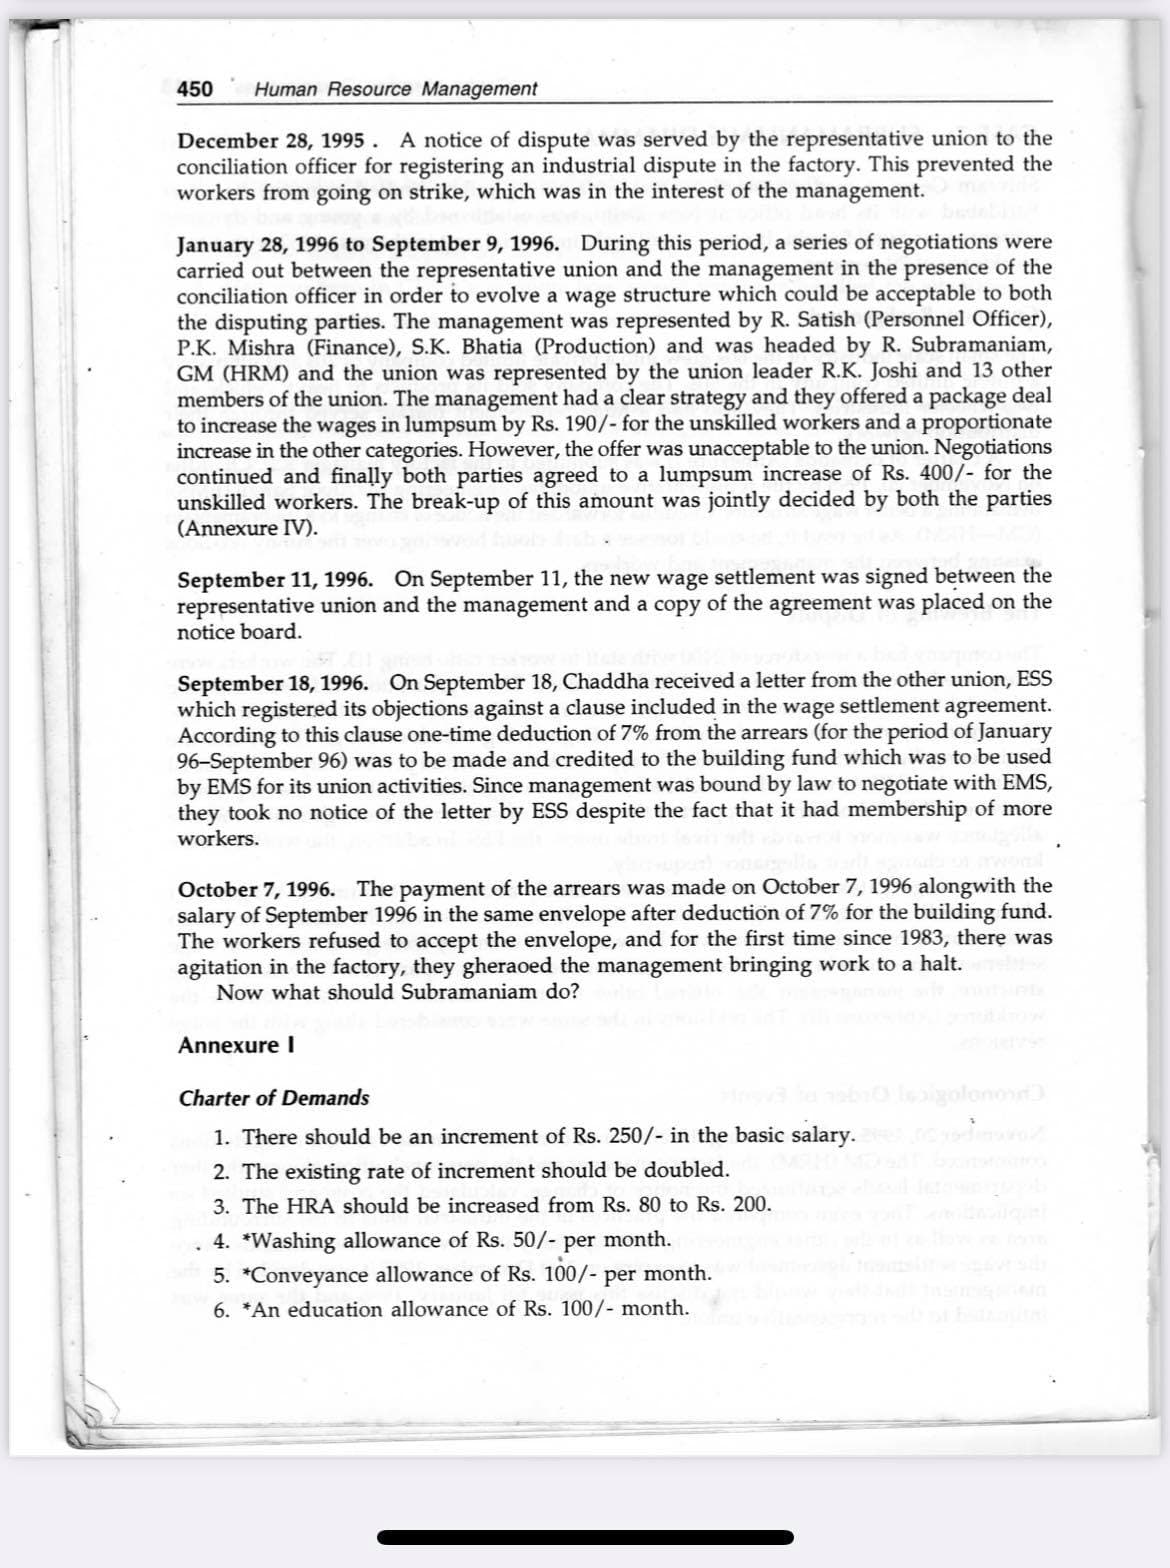 450
Human Resource Management
December 28, 1995. A notice of dispute was served by the representative union to the
conciliation officer for registering an industrial dispute in the factory. This prevented the
workers from going on strike, which was in the interest of the management.
January 28, 1996 to September 9, 1996. During this period, a series of negotiations were
carried out between the representative union and the management in the presence of the
conciliation officer in order to evolve a wage structure which could be acceptable to both
the disputing parties. The management was represented by R. Satish (Personnel Officer),
P.K. Mishra (Finance), S.K. Bhatia (Production) and was headed by R. Subramaniam,
GM (HRM) and the union was represented by the union leader R.K. Joshi and 13 other
members of the union. The management had a clear strategy and they offered a package deal
to increase the wages in lumpsum by Rs. 190/- for the unskilled workers and a proportionate
increase in the other categories. However, the offer was unacceptable to the union. Negotiations
continued and finally both parties agreed to a lumpsum increase of Rs. 400/- for the
unskilled workers. The break-up of this amount was jointly decided by both the parties
(Annexure IV).
September 11, 1996. On September 11, the new wage settlement was signed between the
representative union and the management and a copy of the agreement was placed on the
notice board.
September 18, 1996. On September 18, Chaddha received a letter from the other union, ESS
which registered its objections against a clause included in the wage settlement agreement.
According to this clause one-time deduction of 7% from the arrears (for the period of January
96-September 96) was to be made and credited to the building fund which was to be used
by EMS for its union activities. Since management was bound by law to negotiate with EMS,
they took no notice of the letter by ESS despite the fact that it had membership of more
workers.
October 7, 1996. The payment of the arrears was made on October 7, 1996 alongwith the
salary of September 1996 in the same envelope after deduction of 7% for the building fund.
The workers refused to accept the envelope, and for the first time since 1983, there was
agitation in the factory, they gheraoed the management bringing work to a halt.
Now what should Subramaniam do?
Annexure I
Charter of Demands
golono
1. There should be an increment of Rs. 250/- in the basic salary.
2. The existing rate of increment should be doubled.
3. The HRA should be increased from Rs. 80 to Rs. 200.
4. *Washing allowance of Rs. 50/- per month.
5. *Conveyance allowance of Rs. 100/- per month.
6. *An education allowance of Rs. 100/- month.
